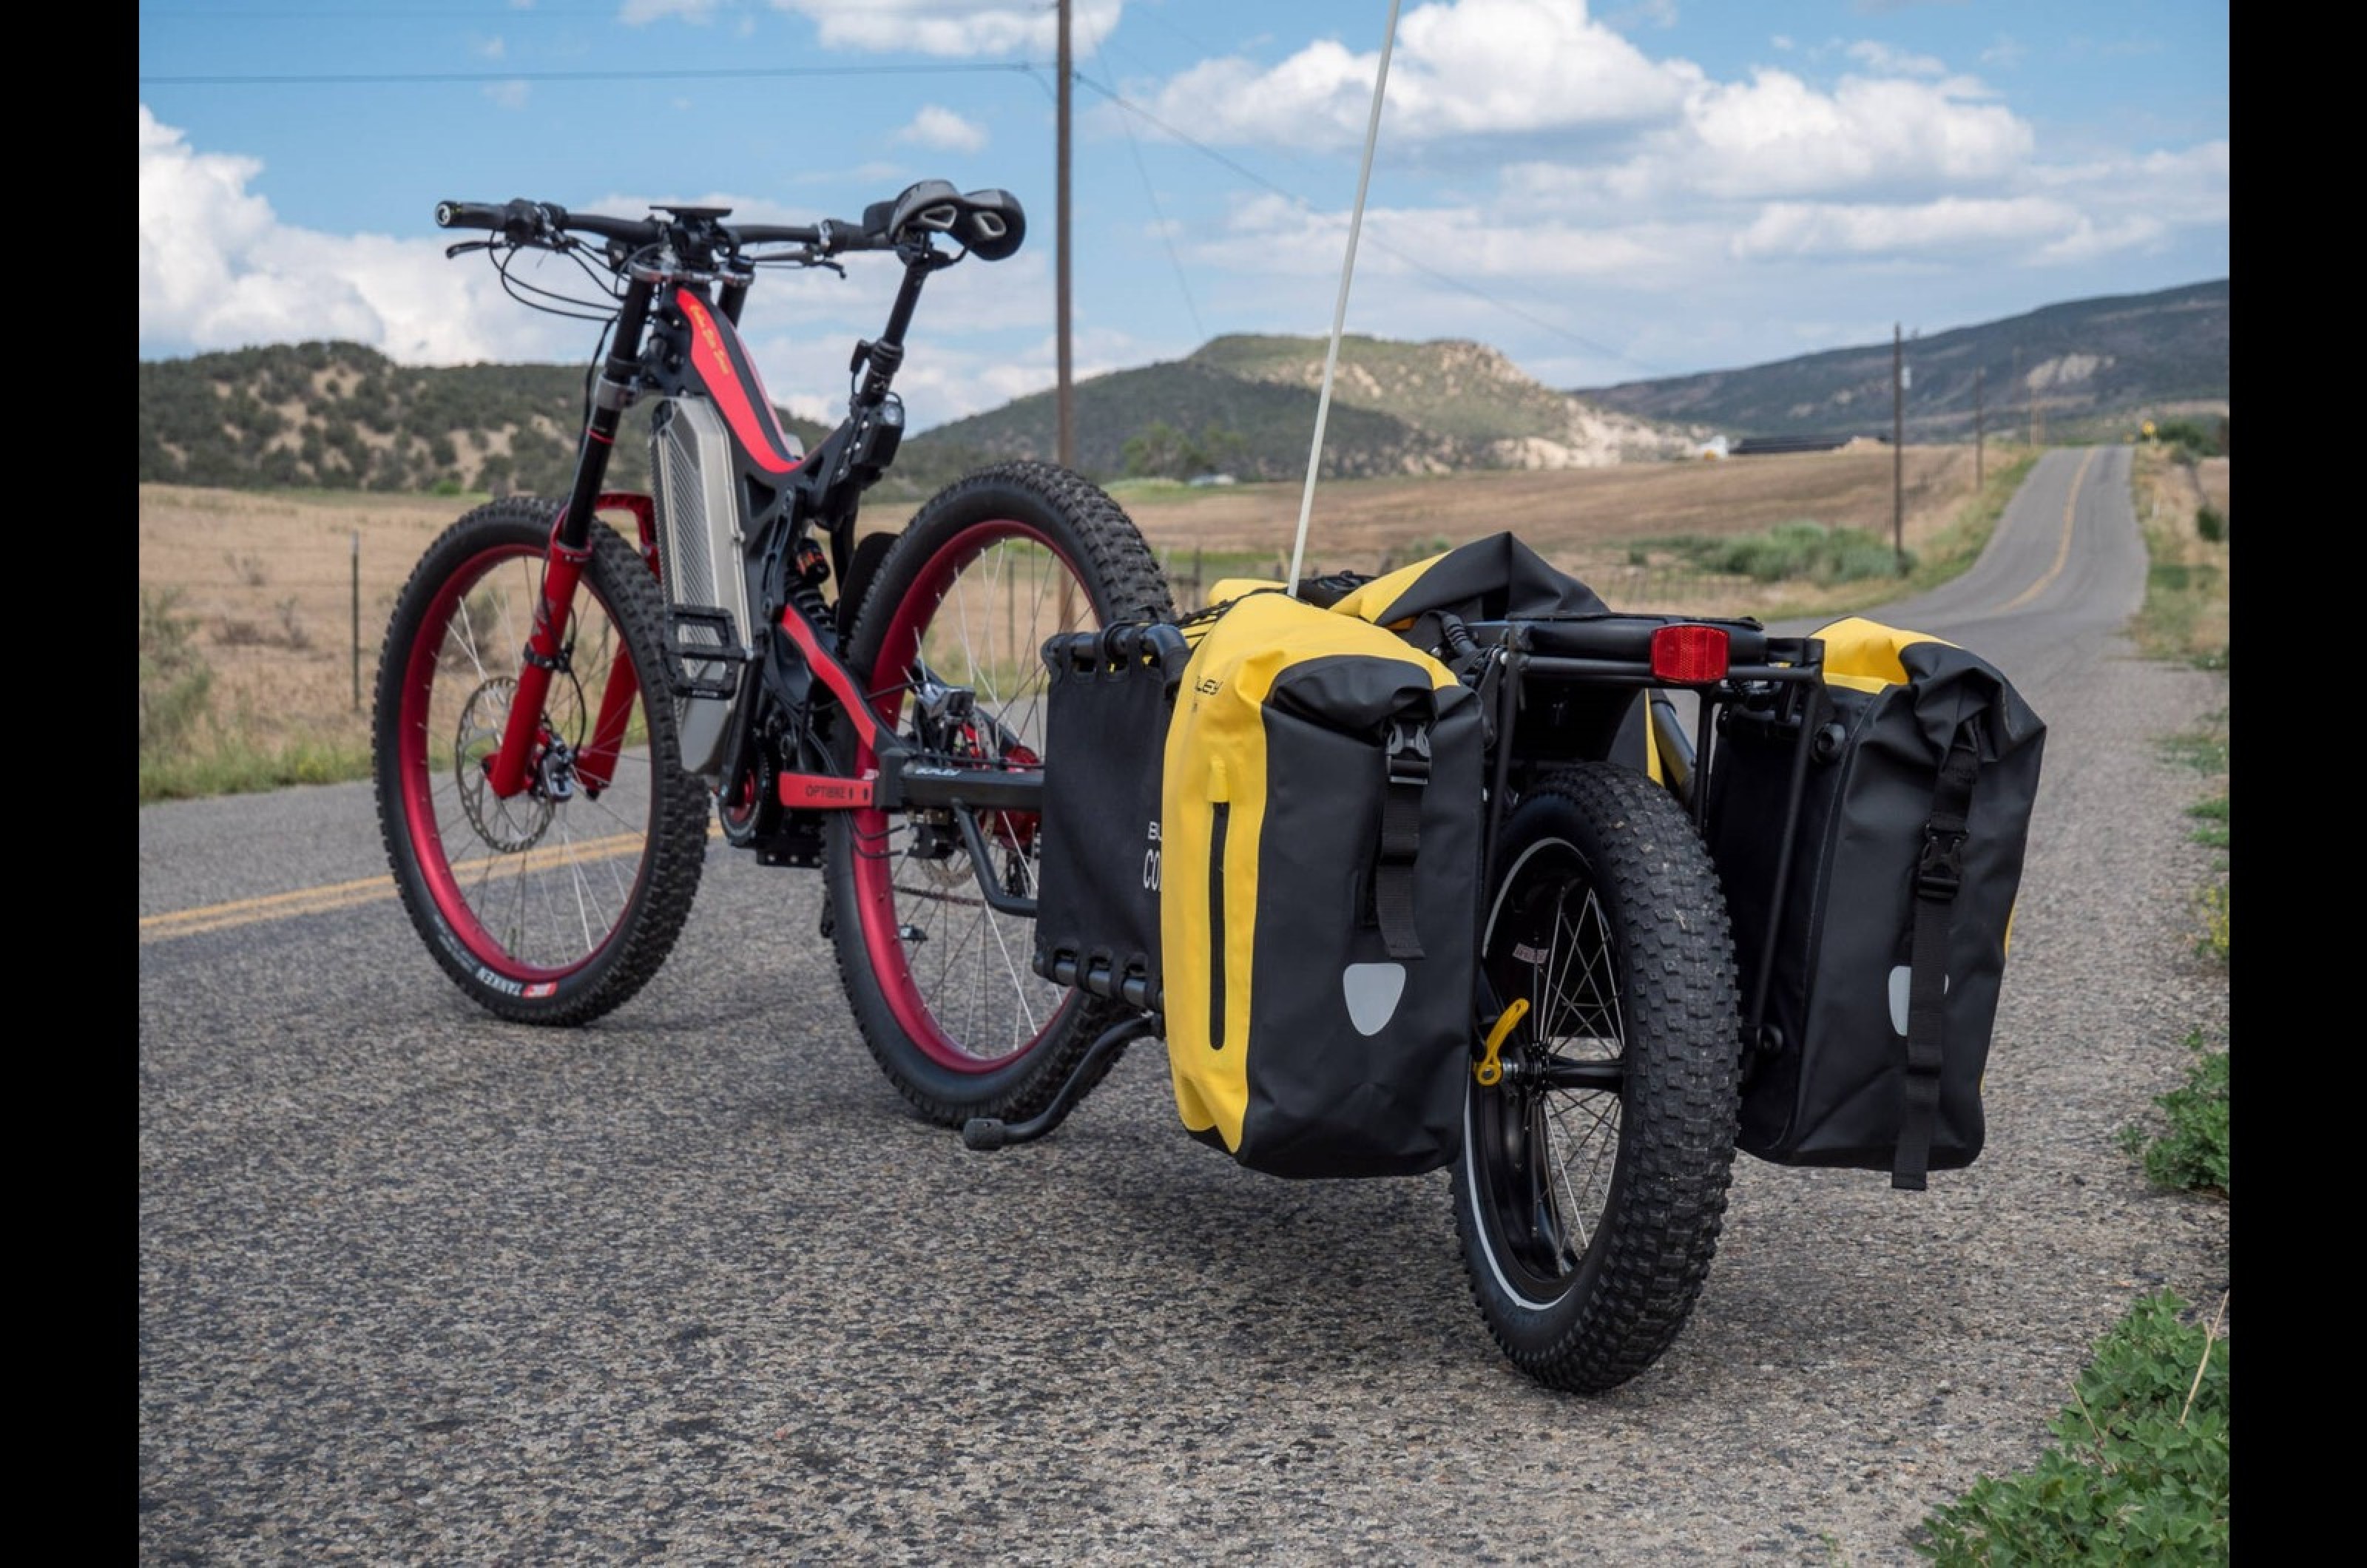 <p>Designed for rough terrain, Optibike equips the R22 Everest with 200mm long travel suspension for rock climbing and Tanken tyres as an available option. A dual-battery set-up gives 3260Wh while a 145lb ft 2500W motor drives the rear wheels, this means a 300-mile range and a 36mph top speed. Weight is relatively low at 42kg due to the R22 Everest having a full carbon frame and battery case, and lightweight battery. Bikes come equipped with an LCD screen while the integrated lights are optional. Unfortunately, the R22 isn’t offered in the UK just yet but those who fancy one in the US will be $18,900 lighter. </p>  <p>BY MATT MACCONNELL</p>